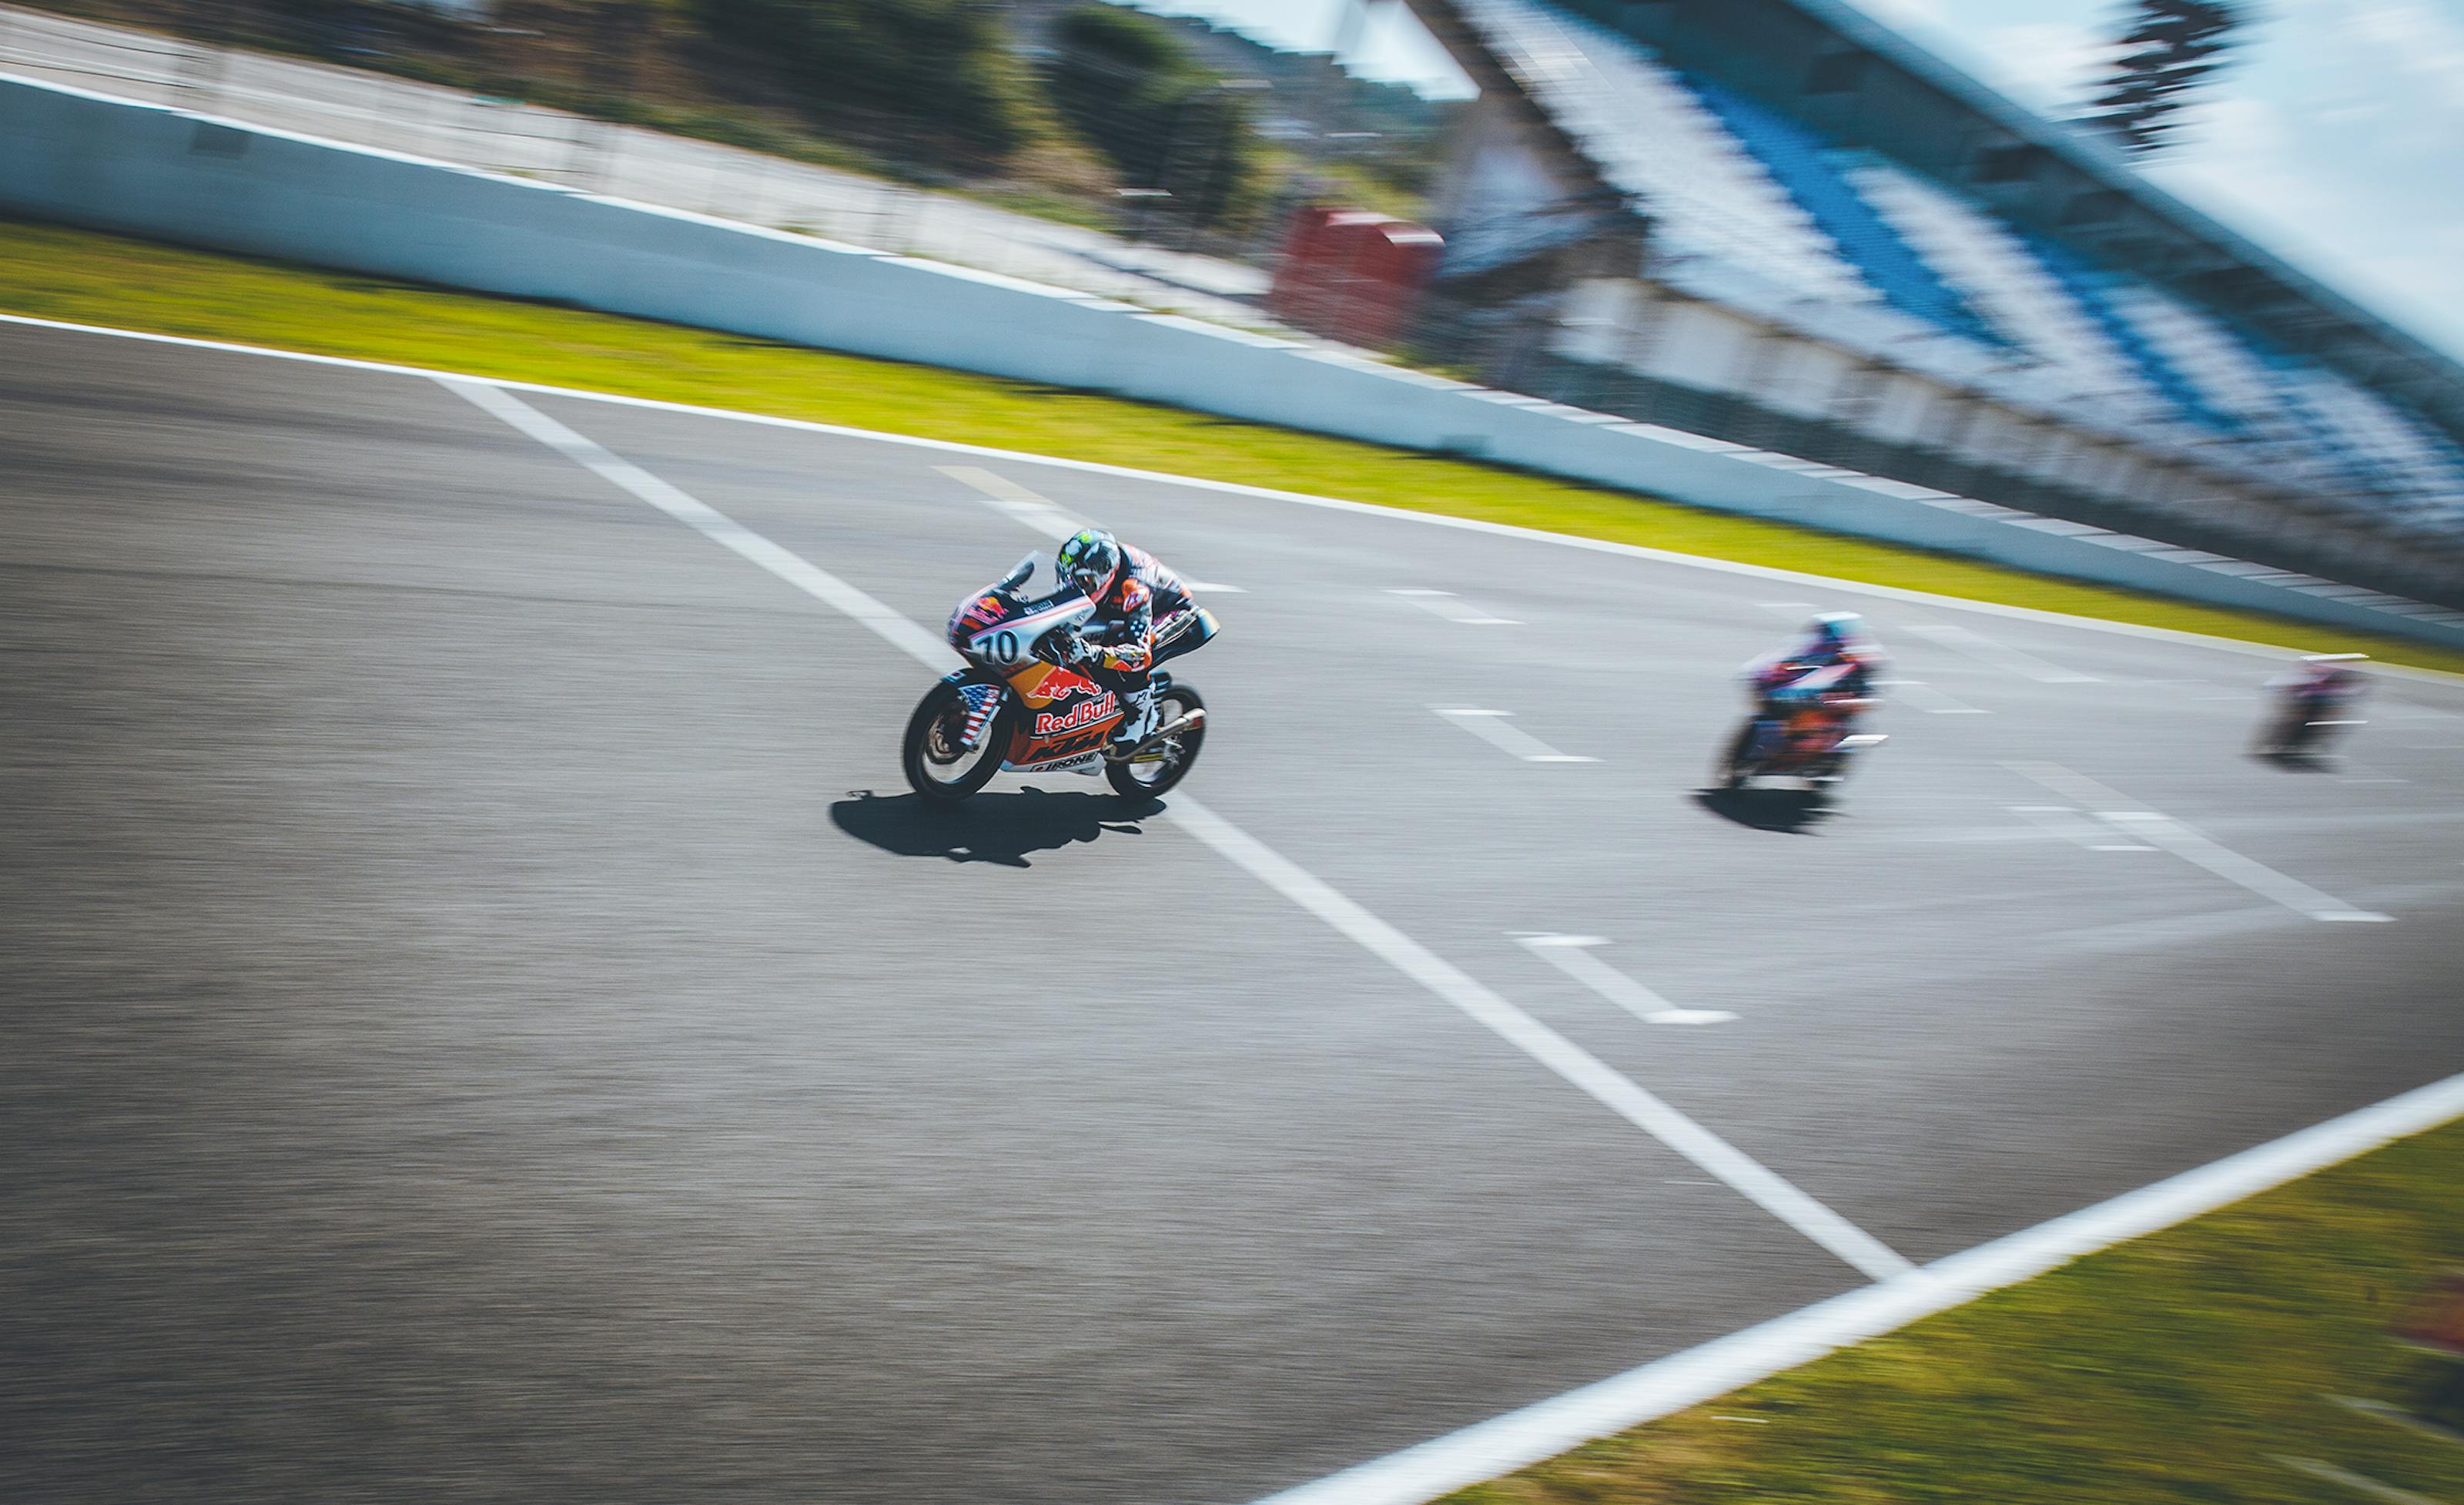 Energy and Passion with the Red Bull Rookies Cup